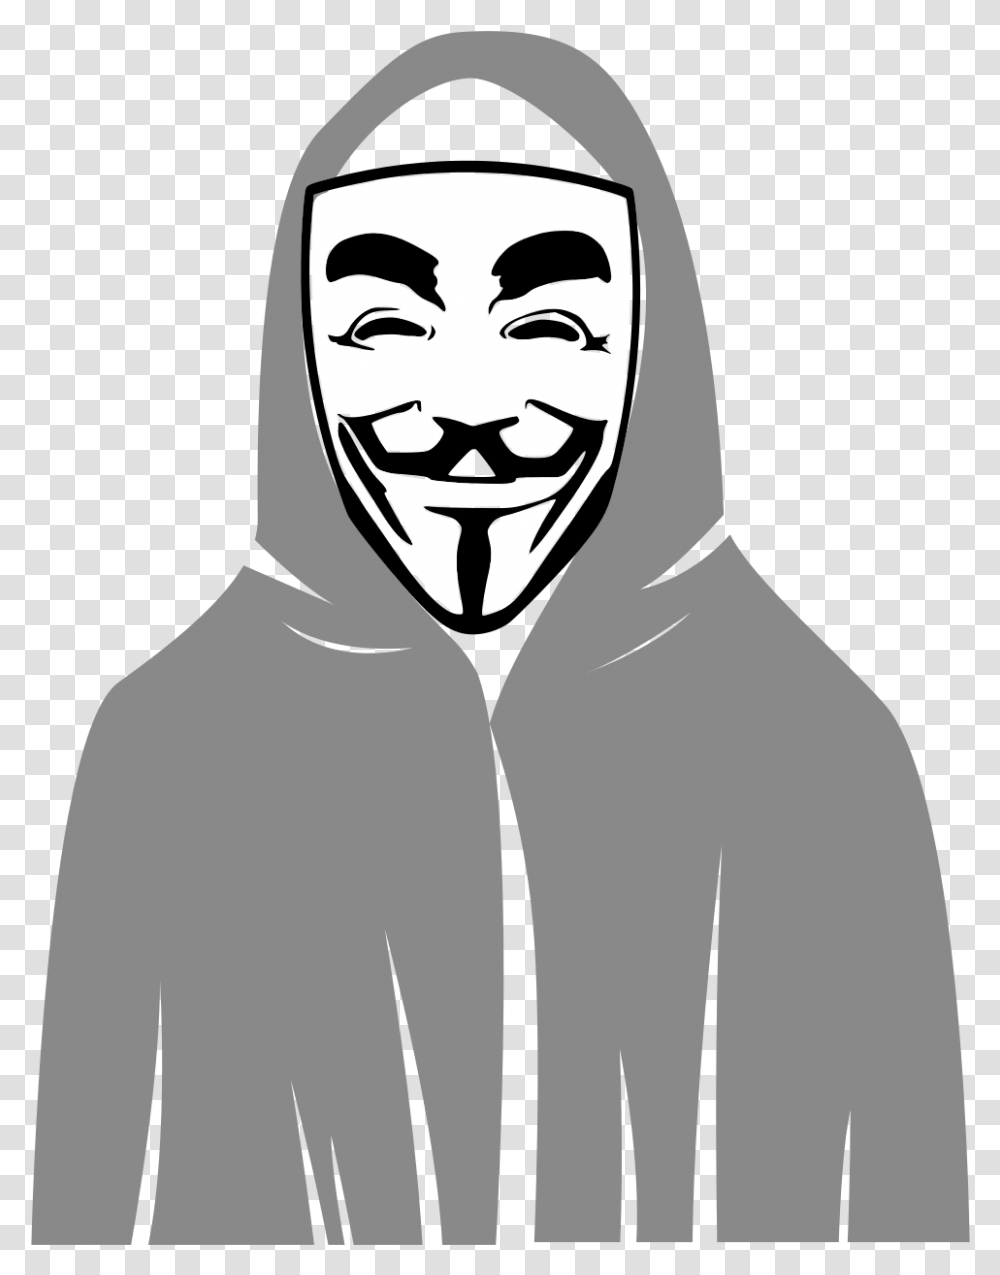 Fileanonymous Hackersvg Wikimedia Commons Hacker, Clothing, Apparel, Hood, Face Transparent Png